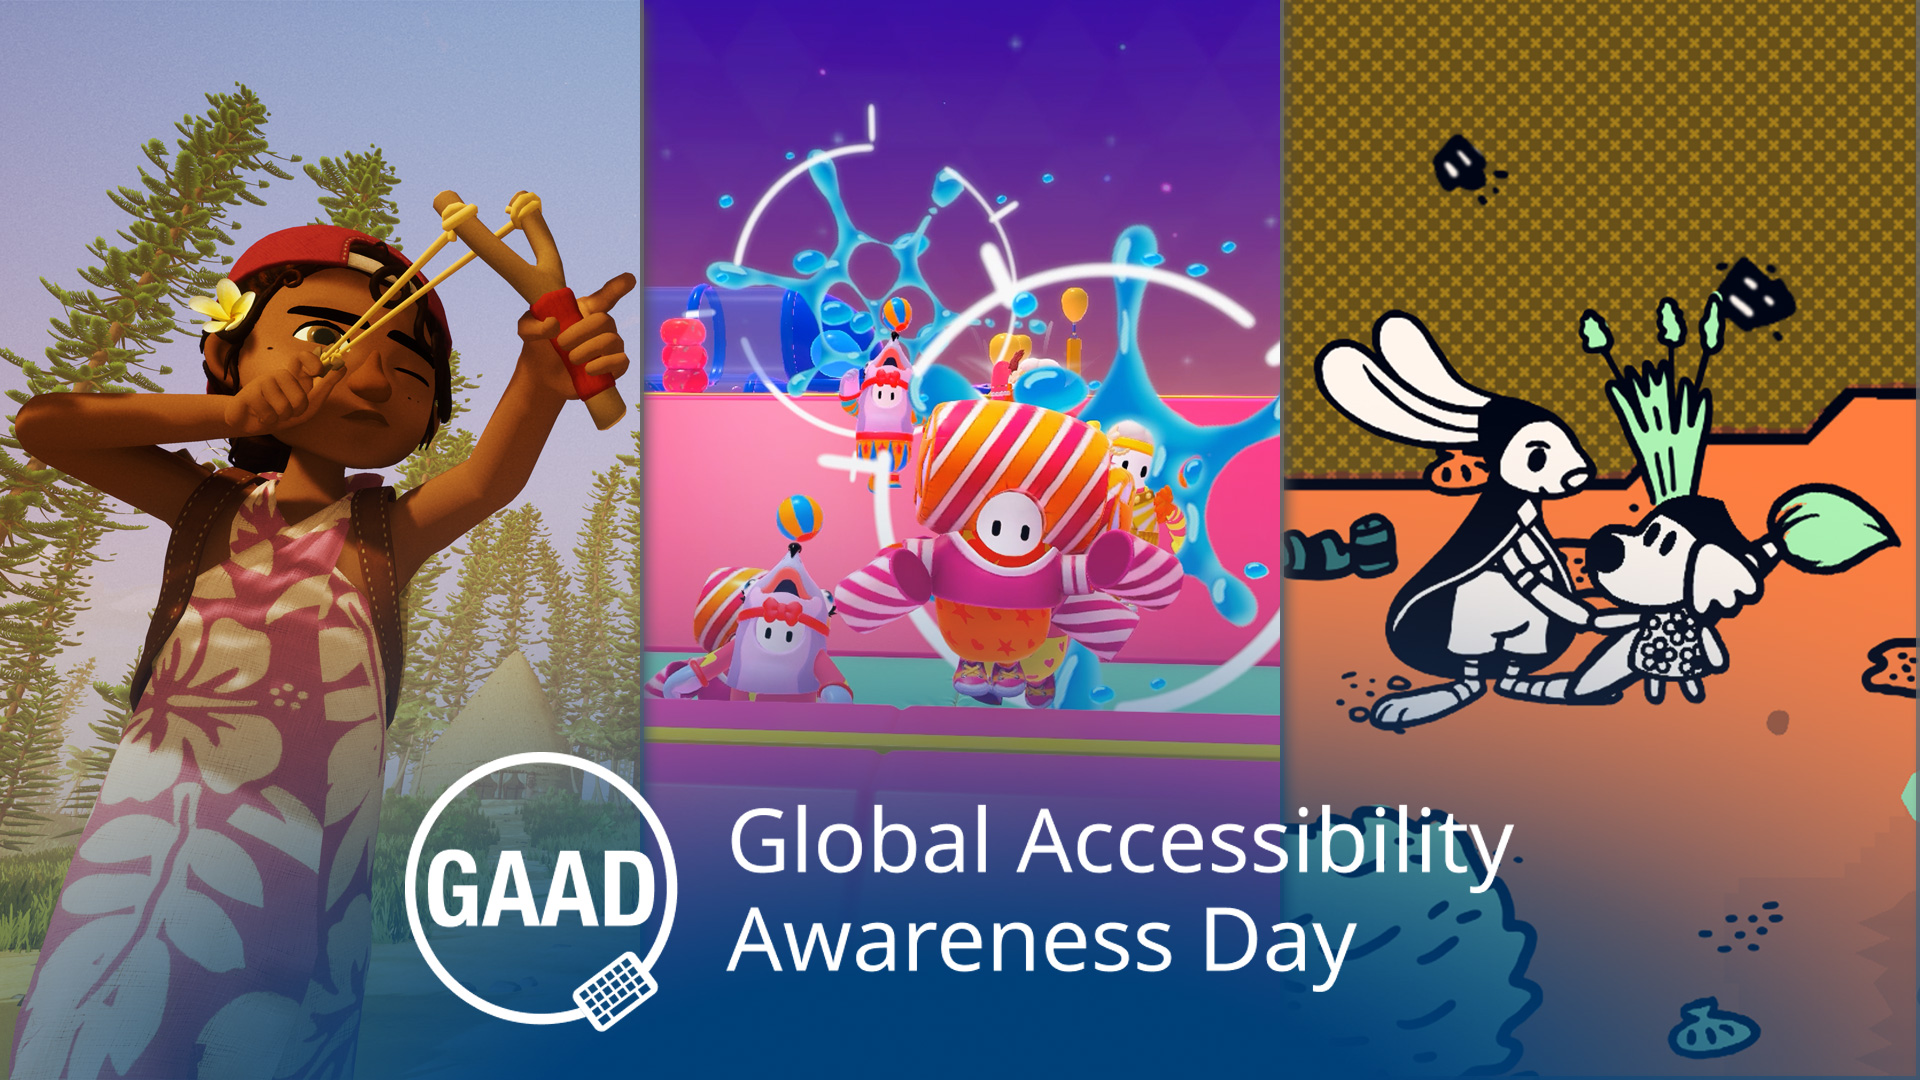 Three screen shots from independent games aligned horizontally. The images shown from left to right are an image from Tchia, Fall Guys, and Chicory. At the bottom is the logo for Global Accessibility Awareness Day.